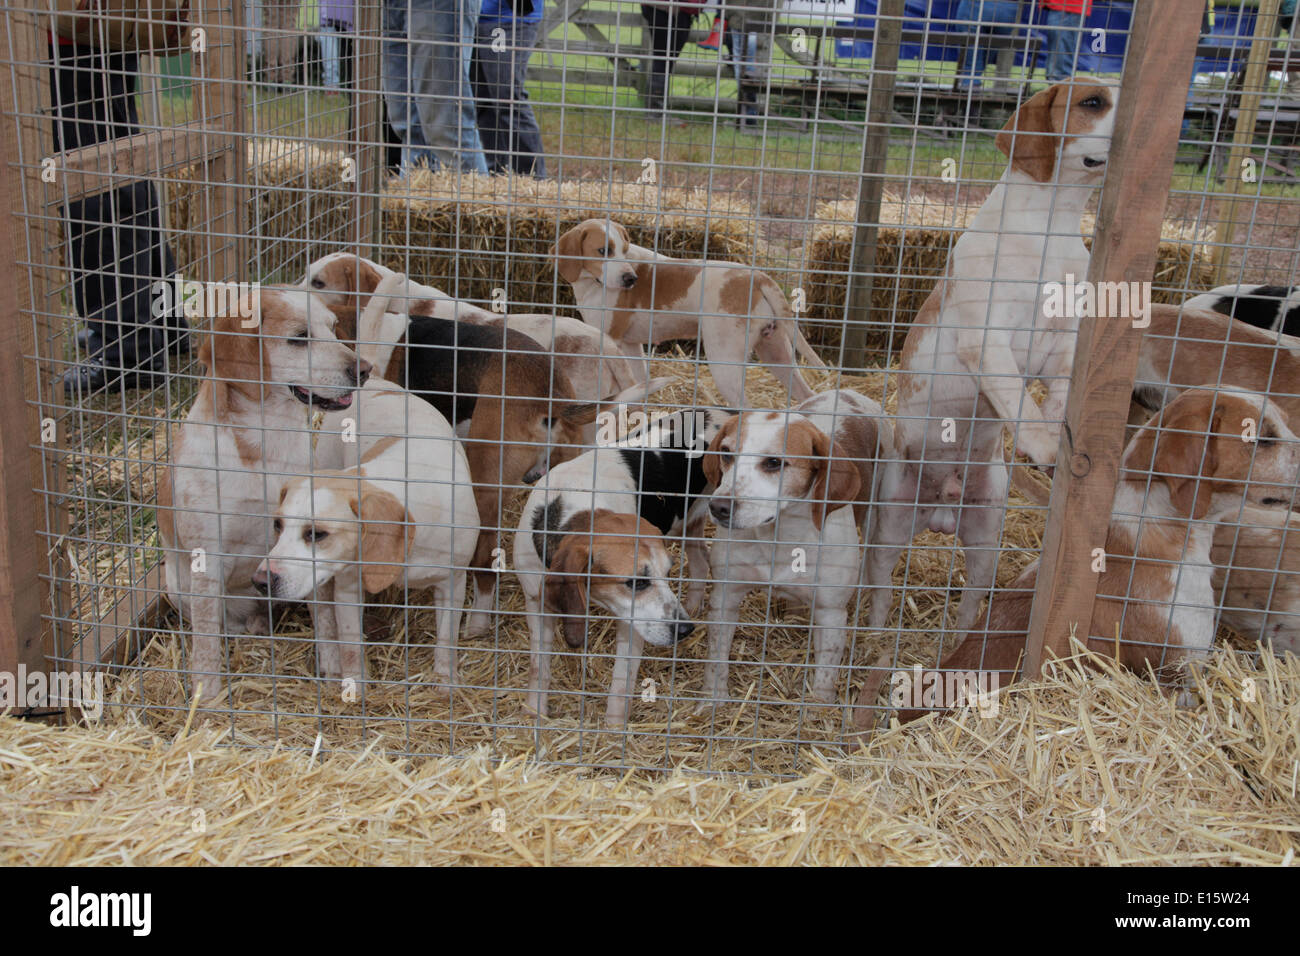 Pack of beagles foxhunting dogs in a pen at Devon County Show Exeter UK Stock Photo